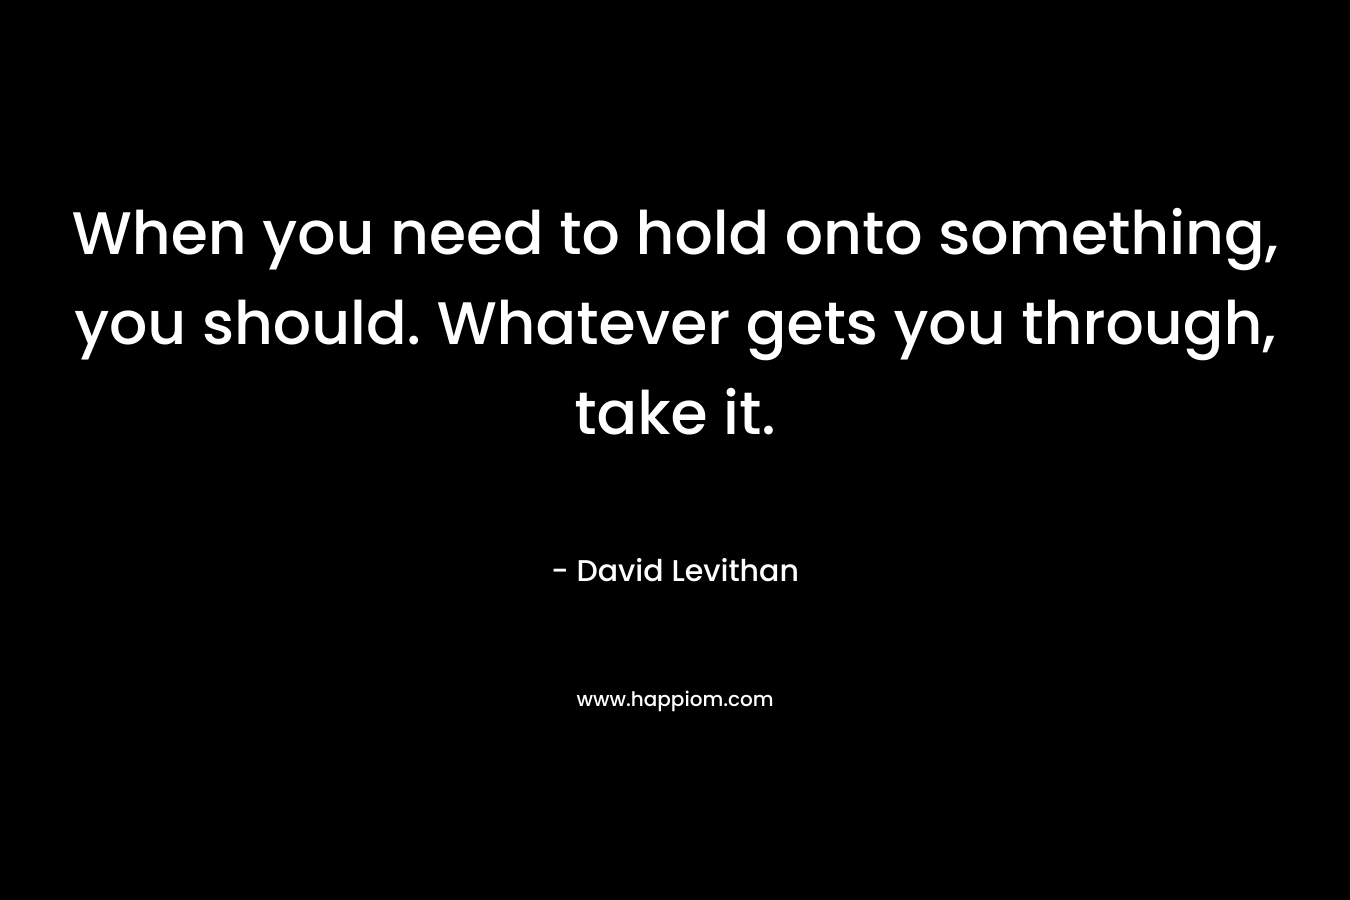 When you need to hold onto something, you should. Whatever gets you through, take it.